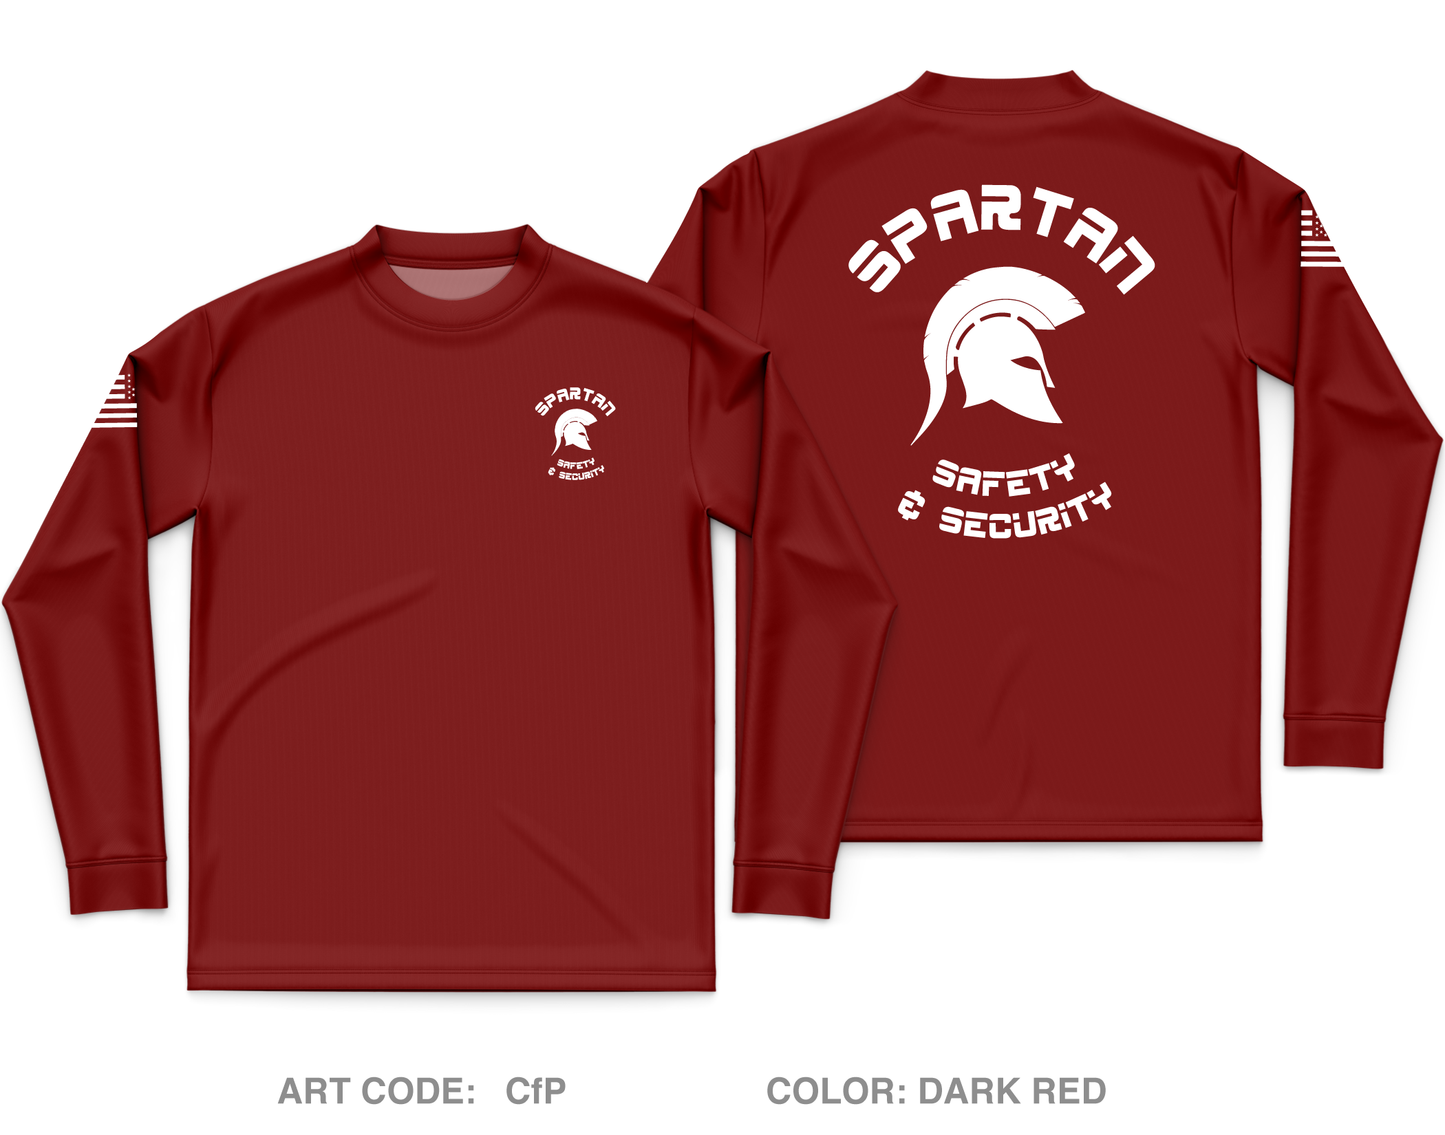 Spartan Safety & Security Store 1 Core Men's LS Performance Tee - CfP